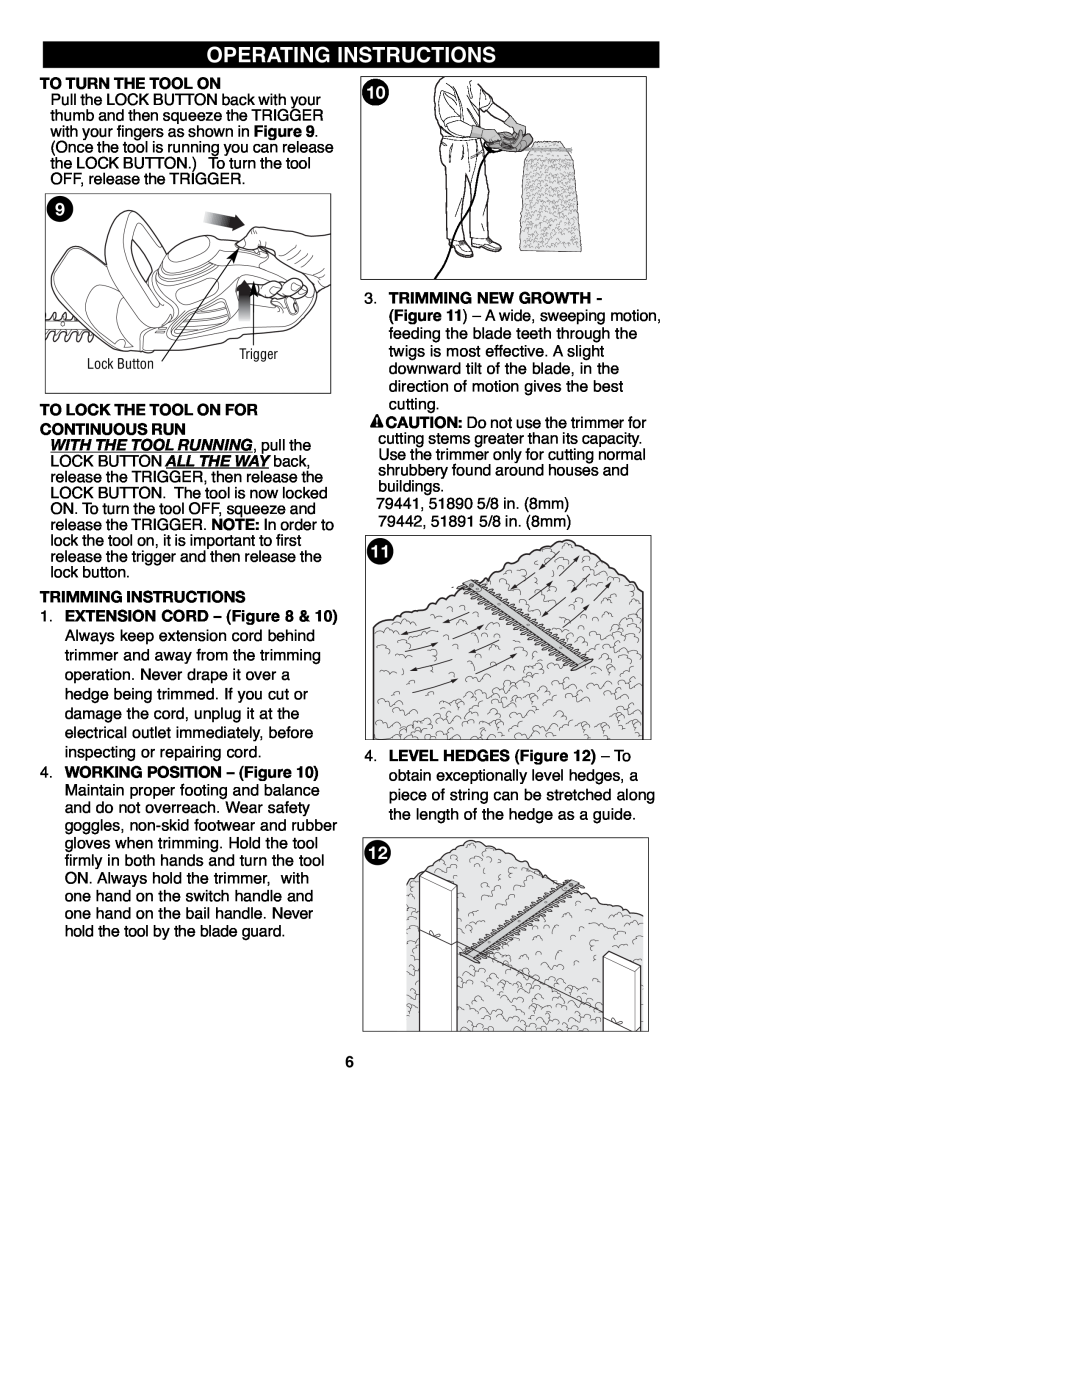 Craftsman 900 Operating Instructions, To Turn The Tool On, To Lock The Tool On For Continuous Run, Trimming Instructions 